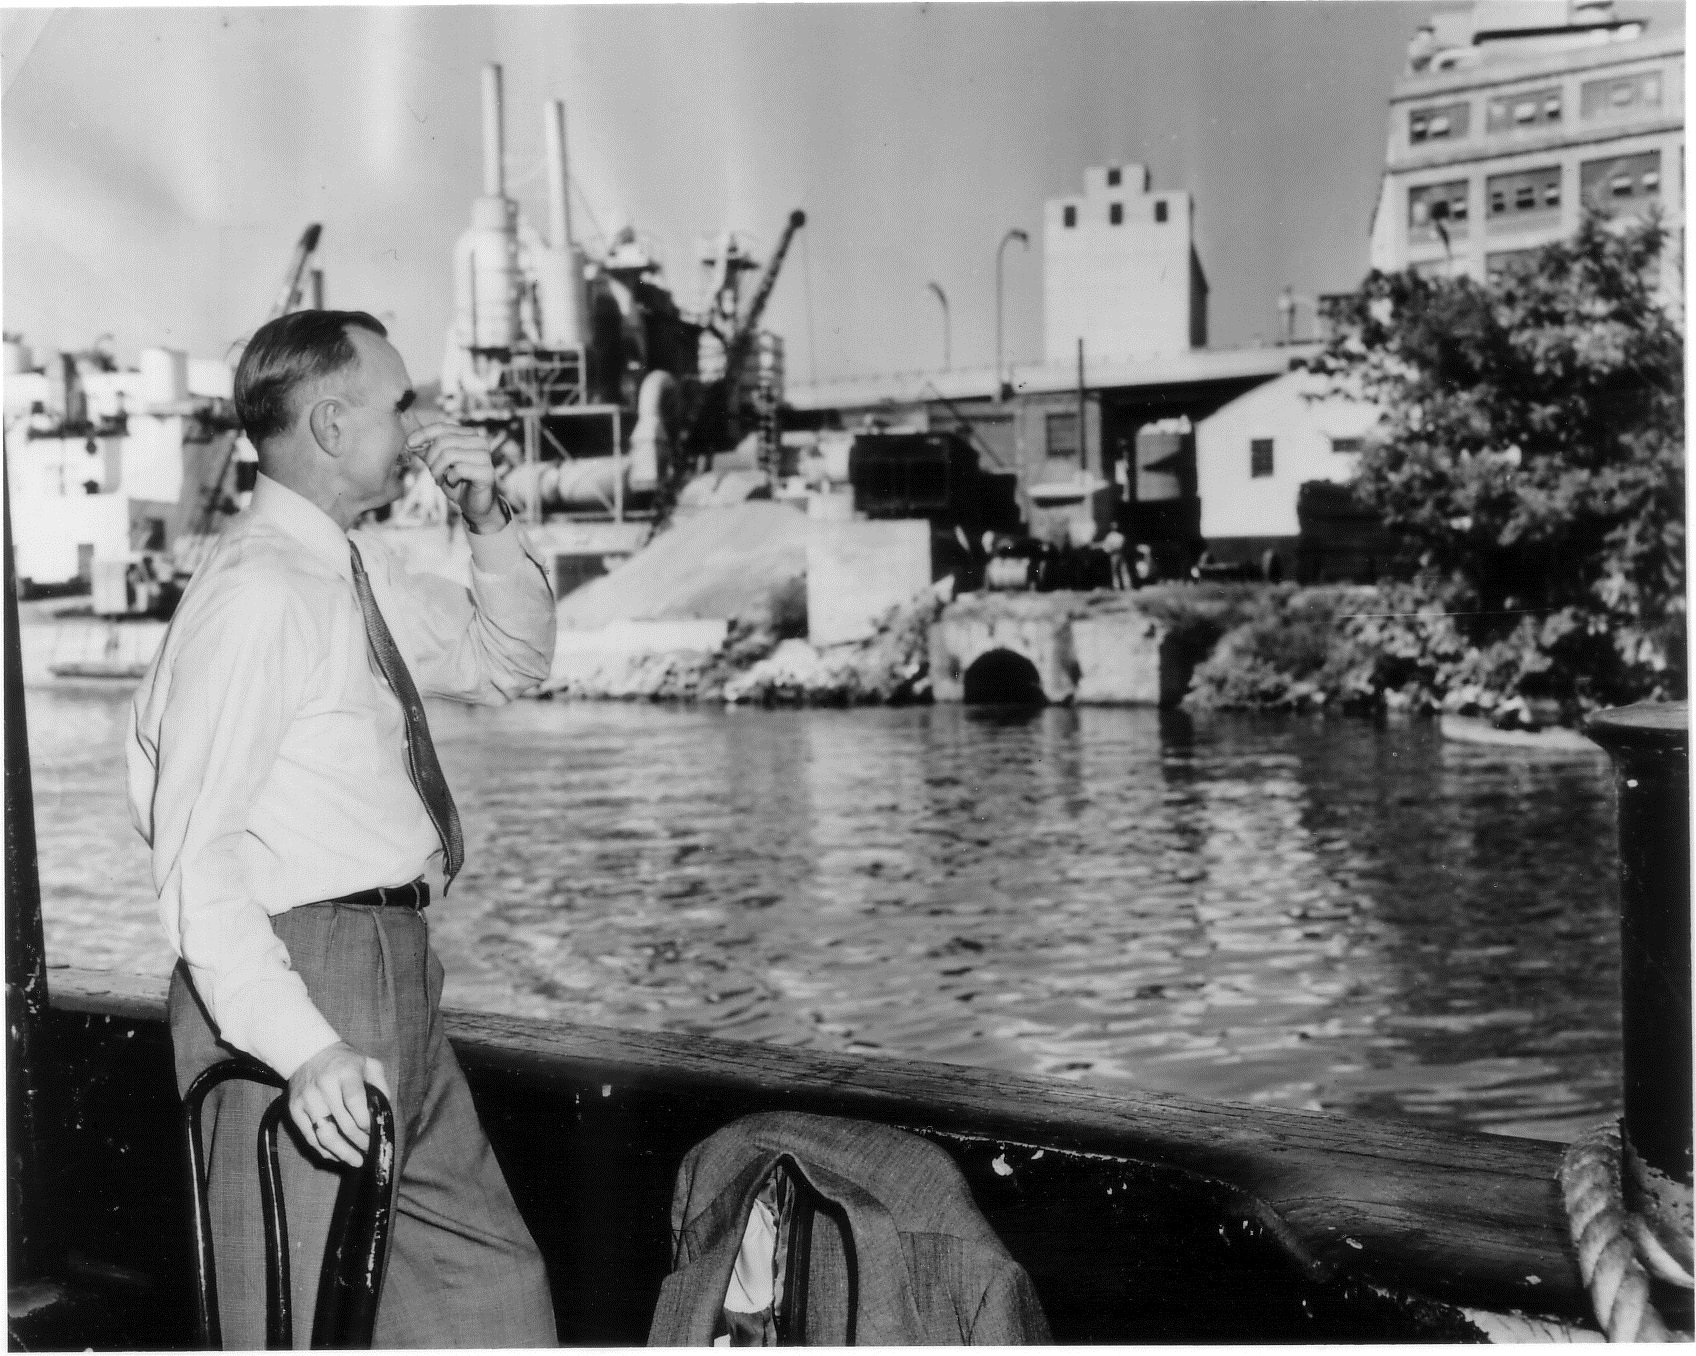 A man stands in a boat, holding his nose. Across the river is an industrial complex with several smokestacks blowing smoke.